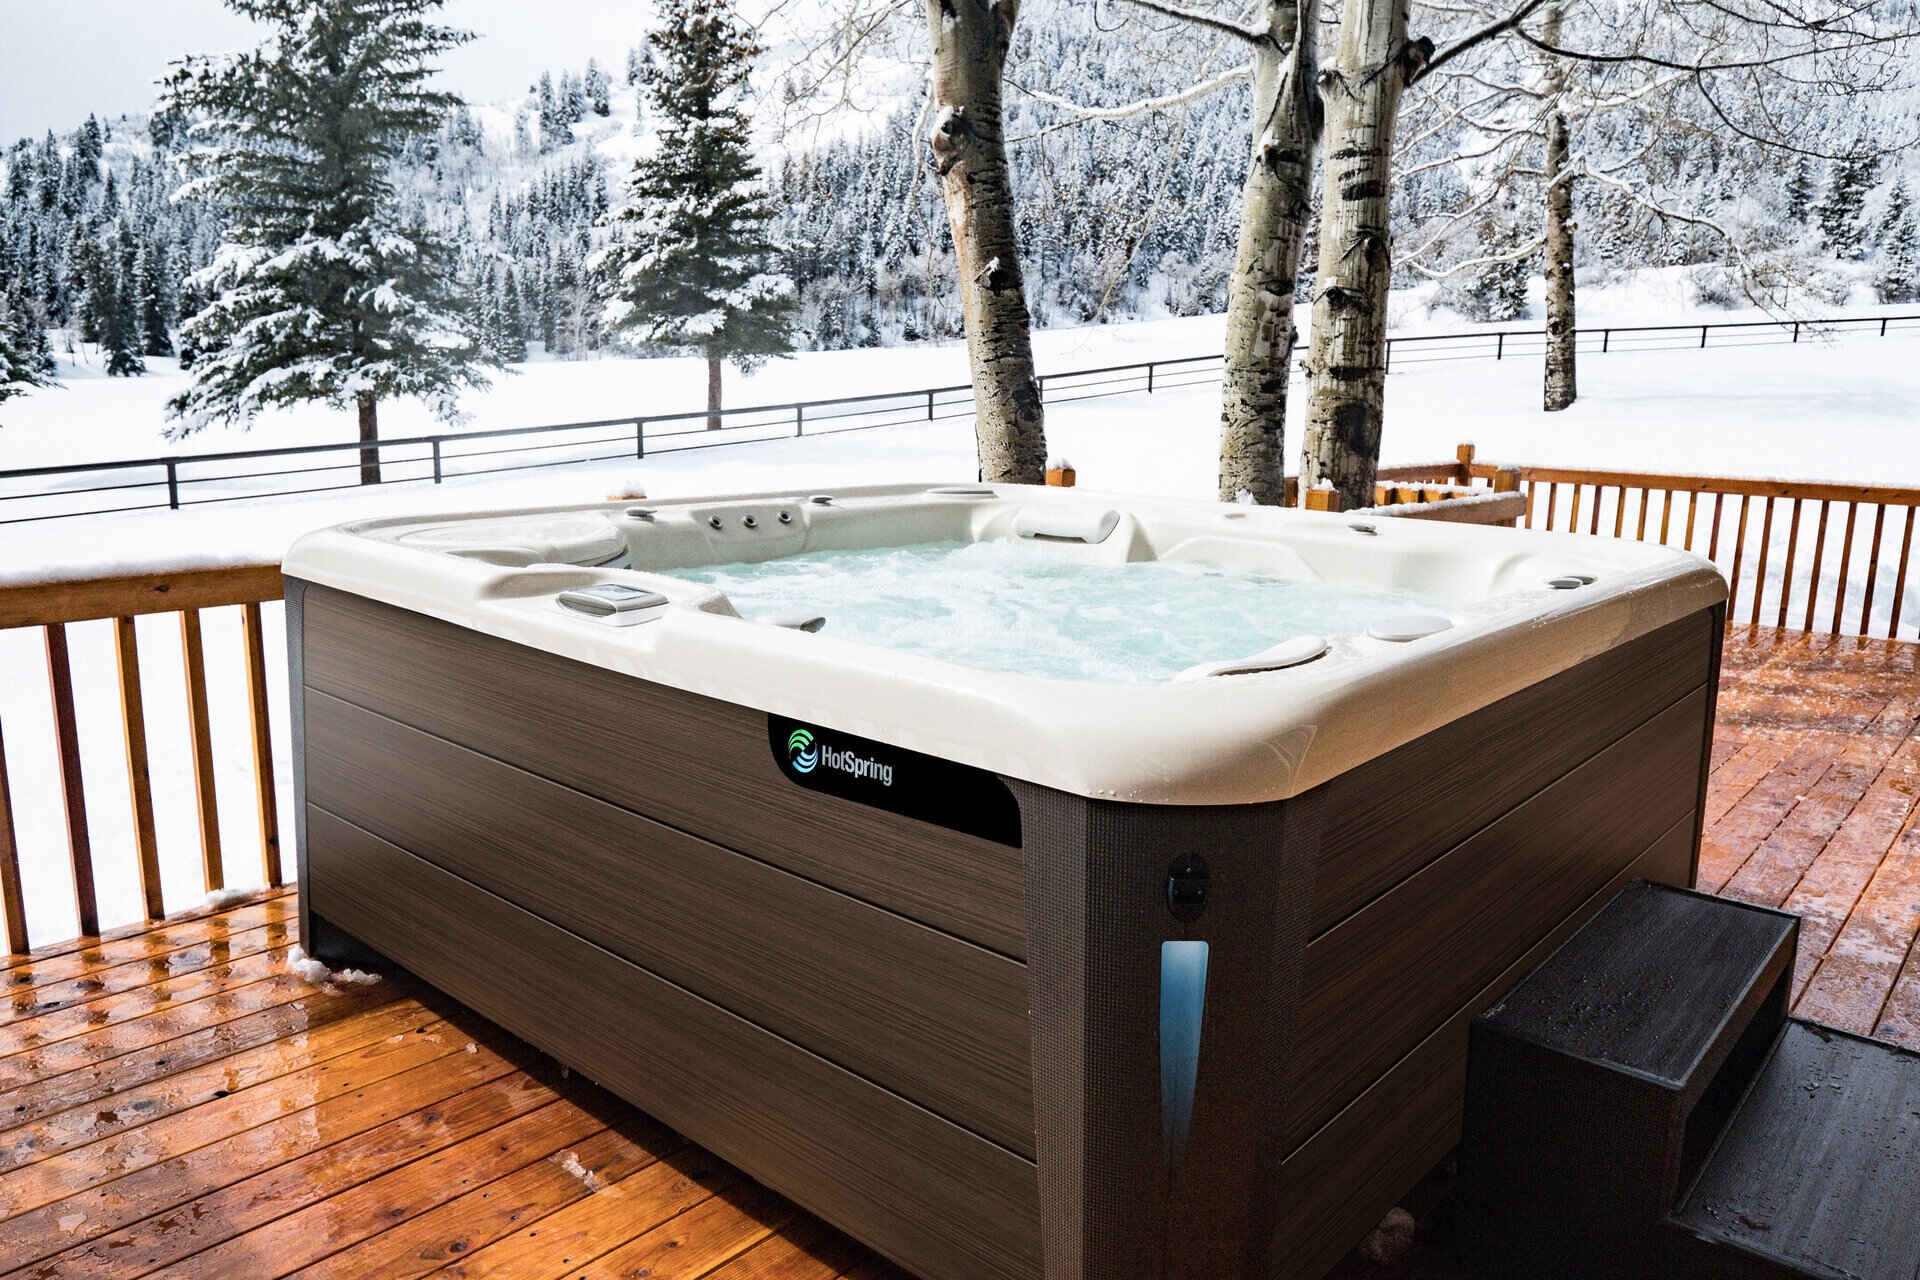 How To Keep Hot Tub Hot In Winter